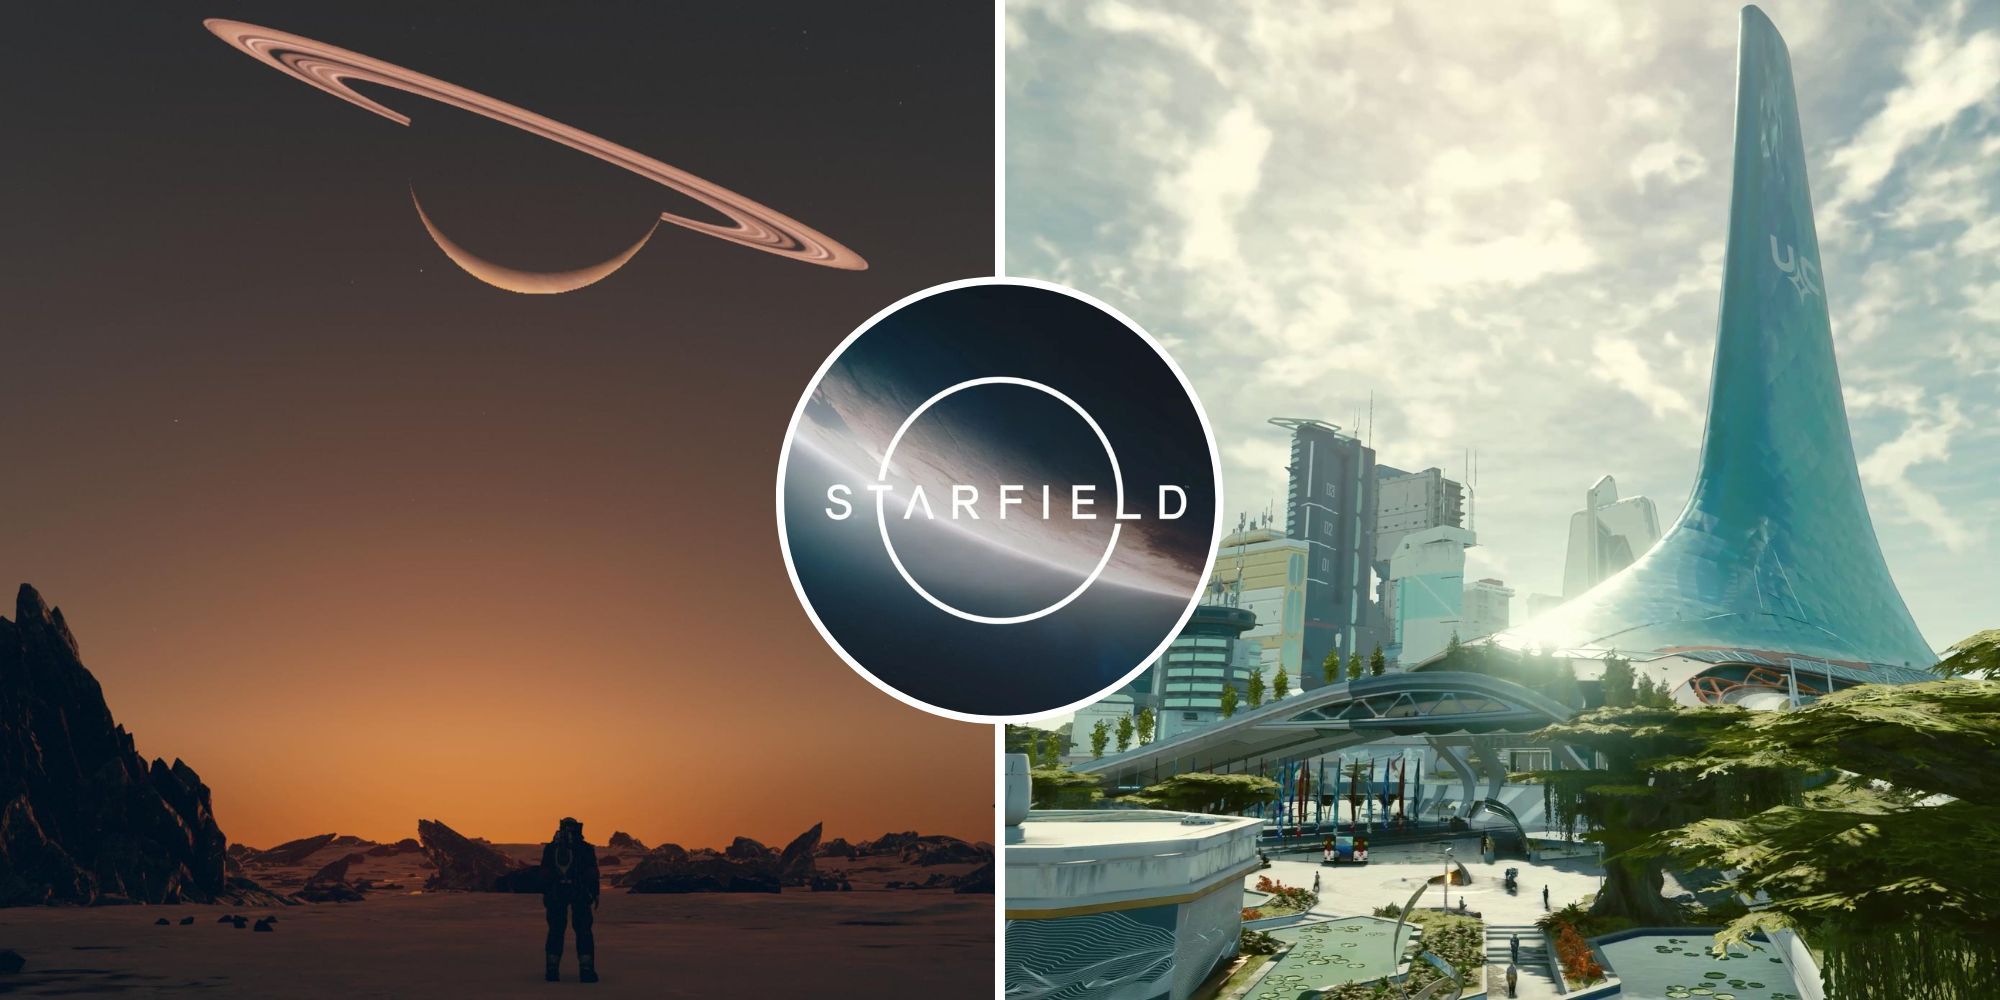 cool places to visit starfield